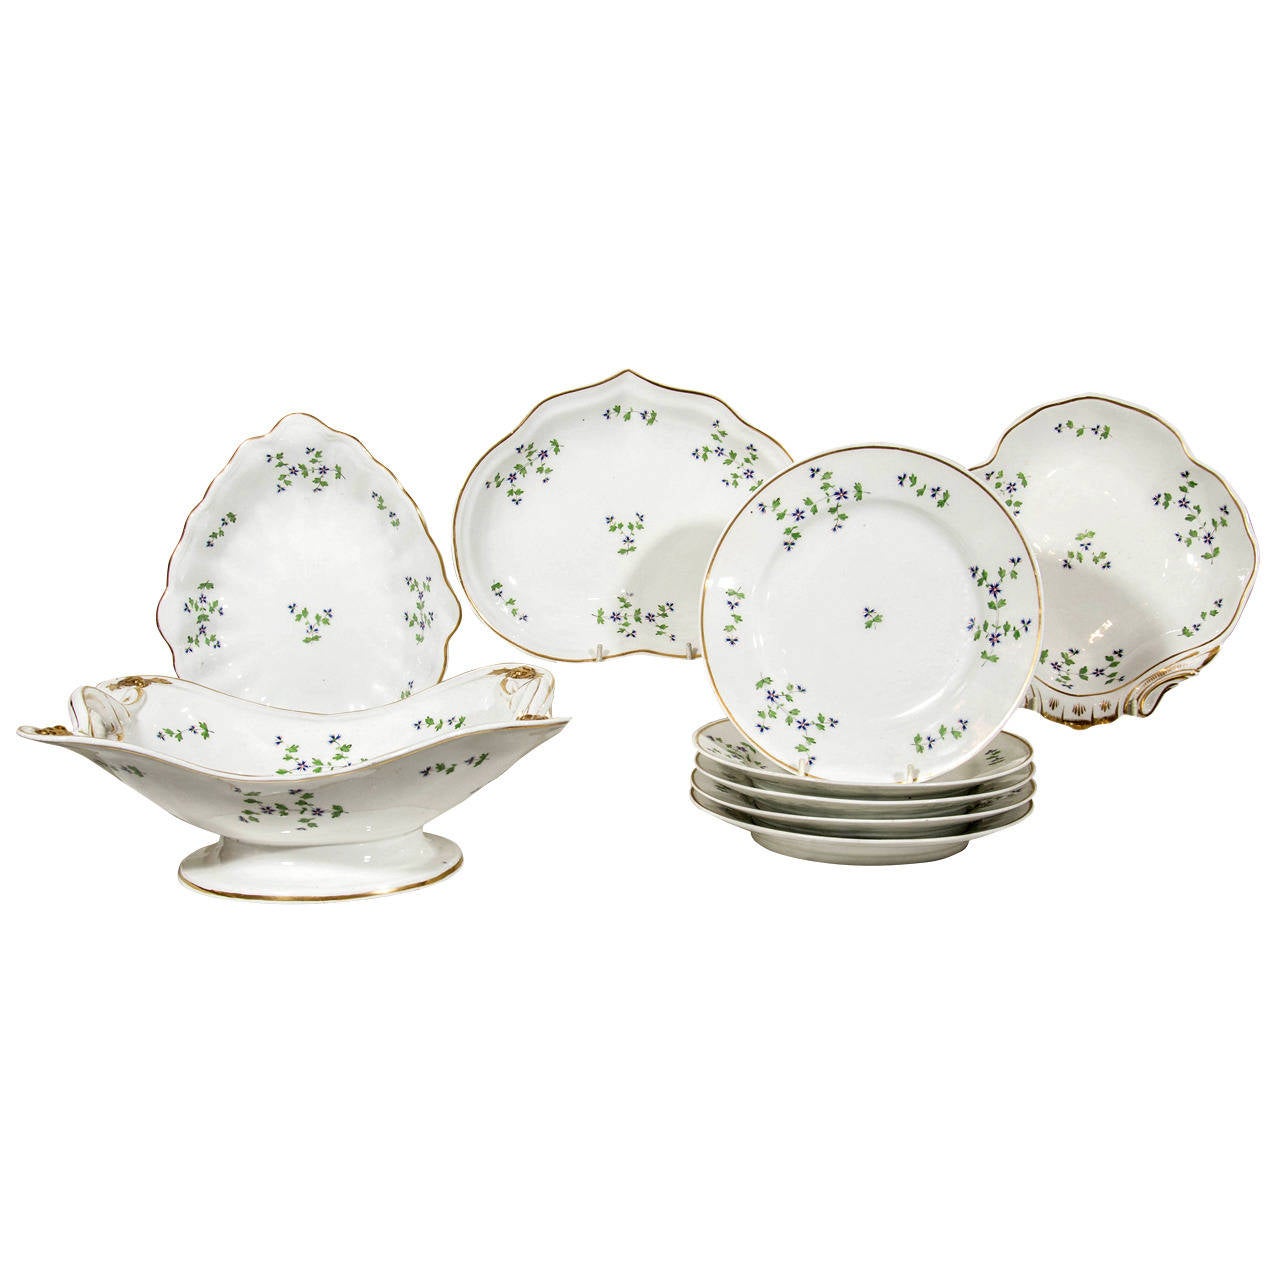 Set of Derby Dishes in the Sprig Pattern